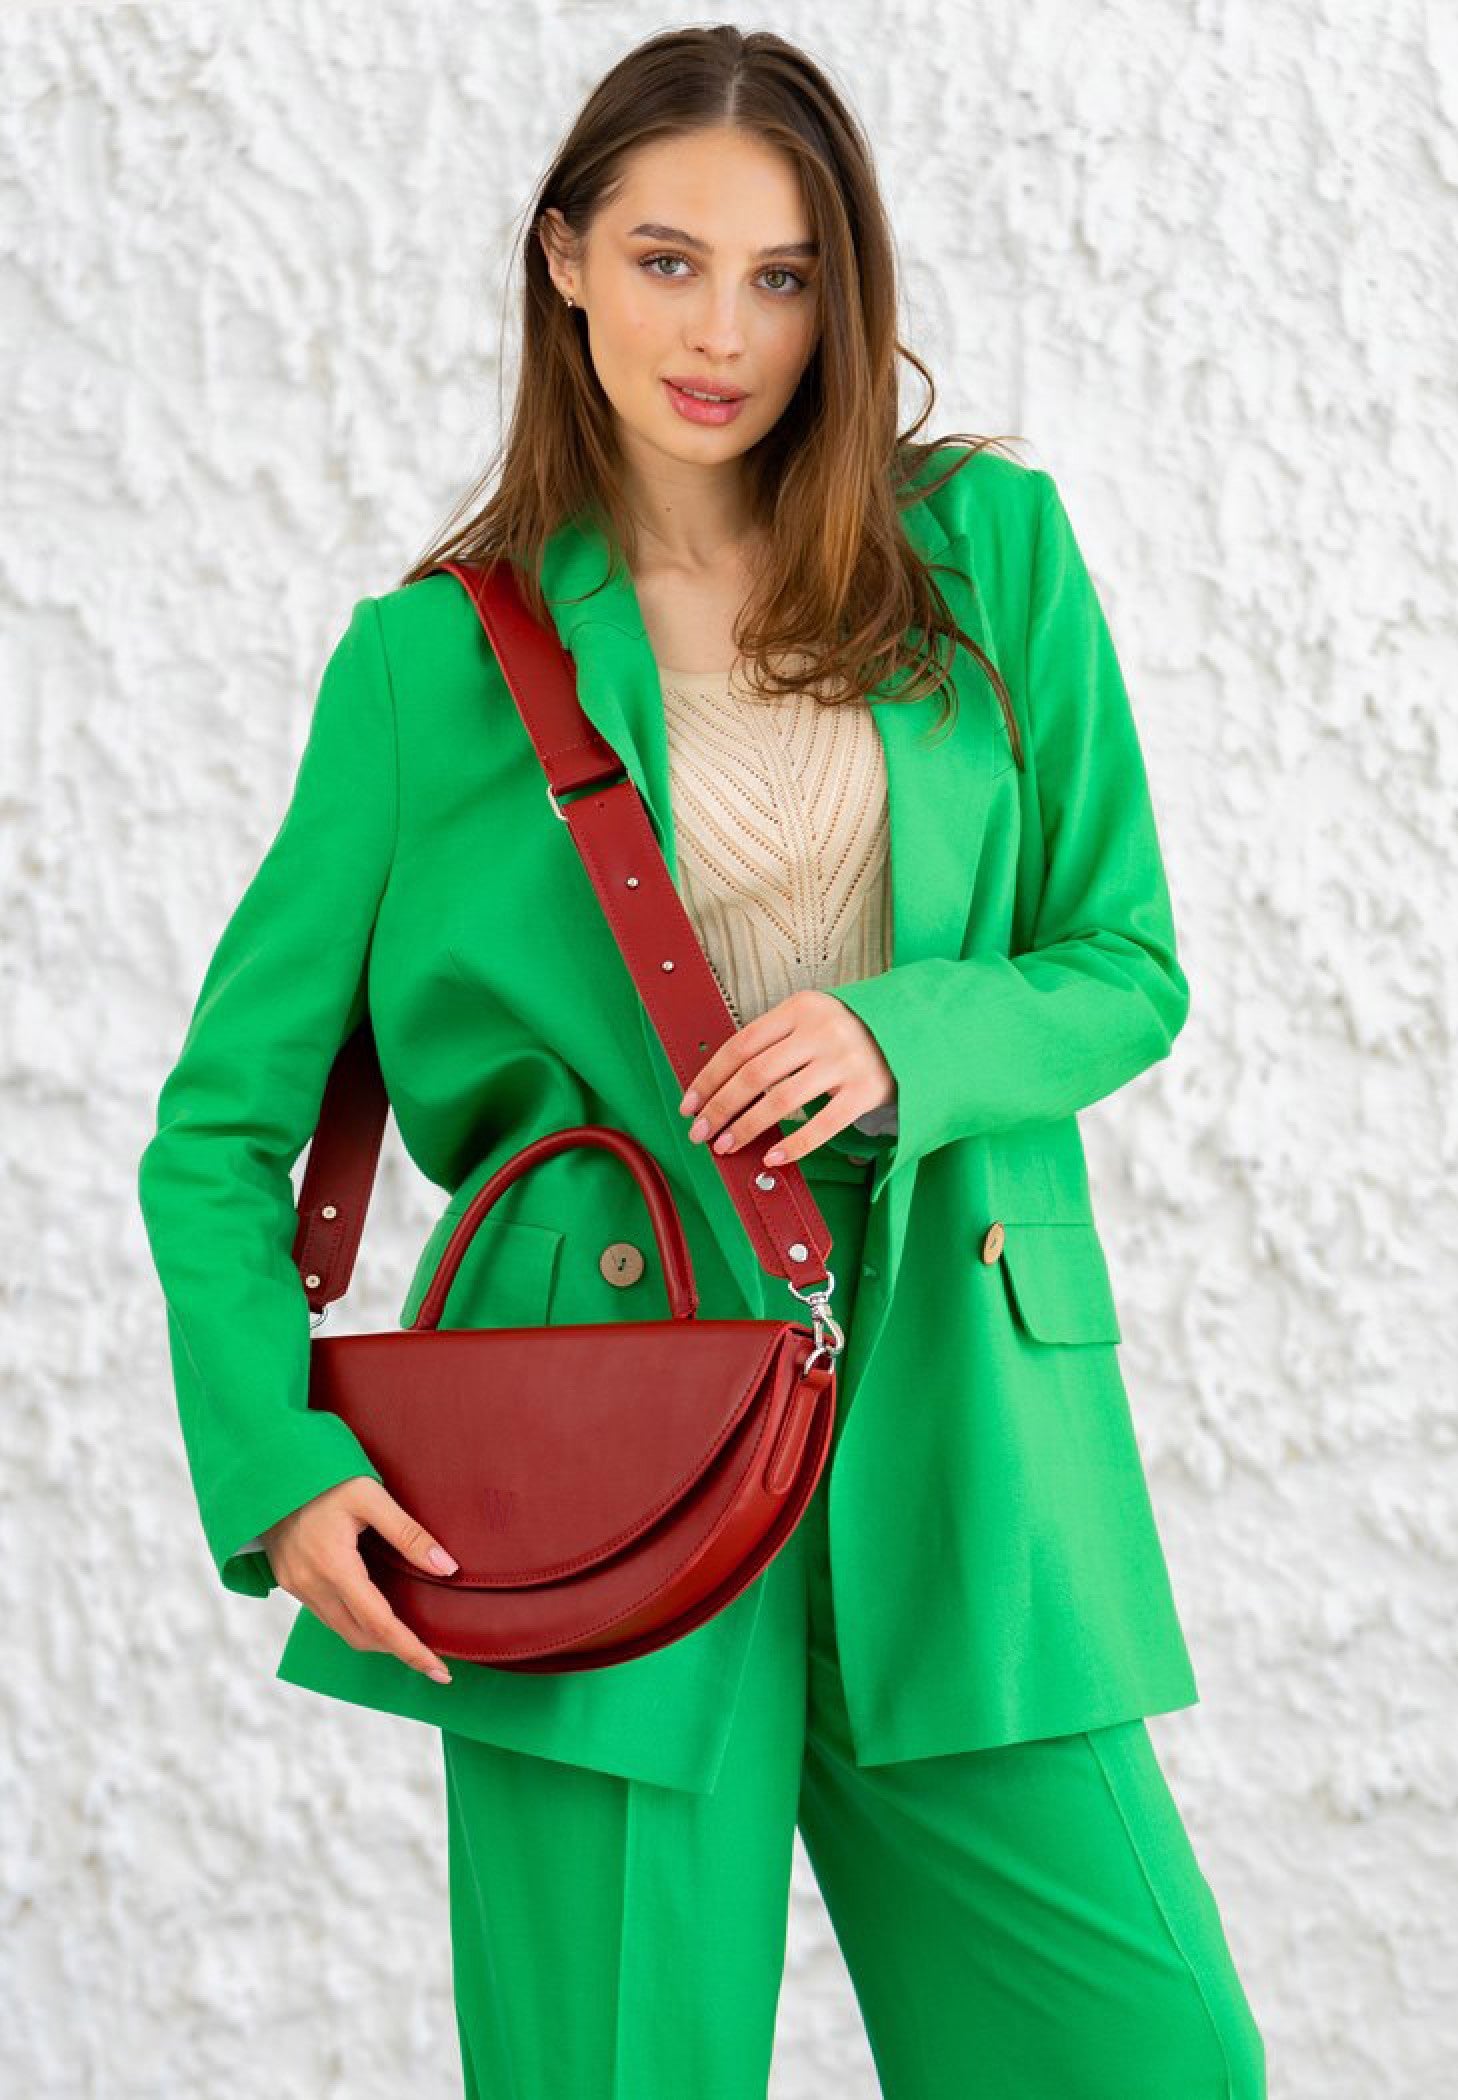 woman in a green outfit holding red leather bag